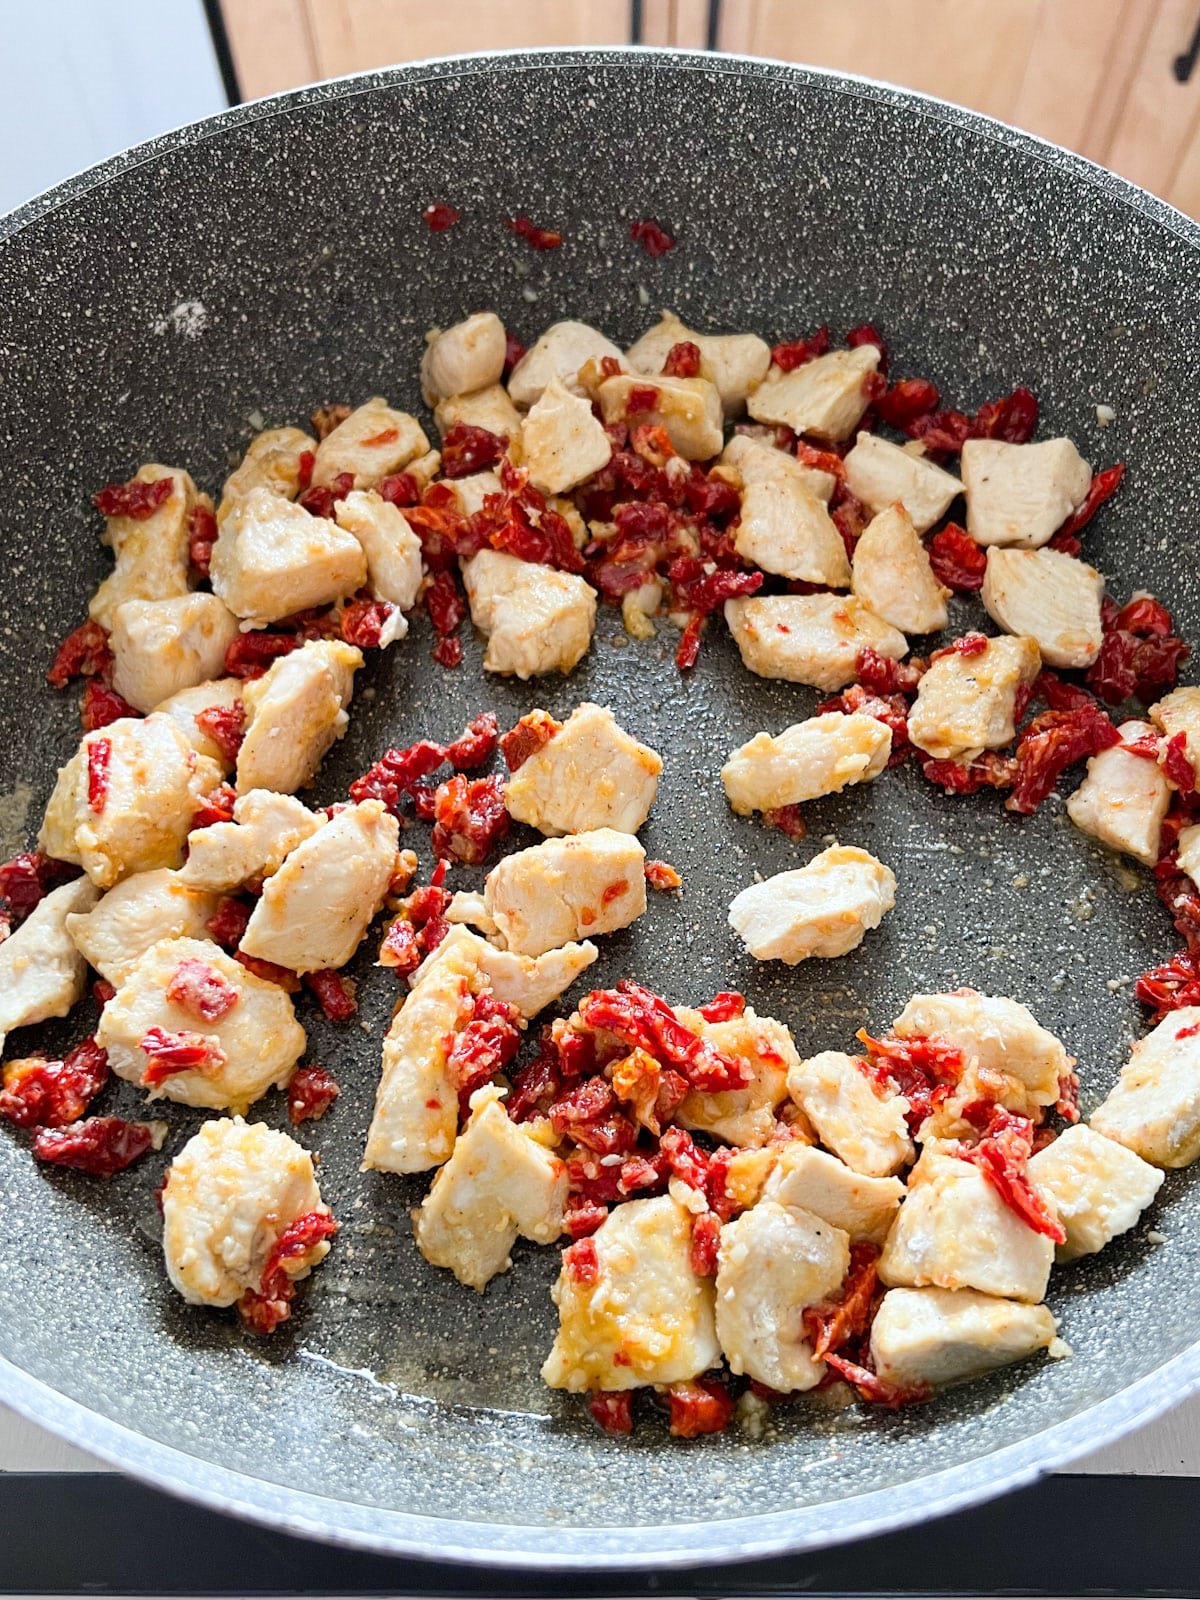 Cooked chicken in a skillet with sun-dried tomatoes and garlic.